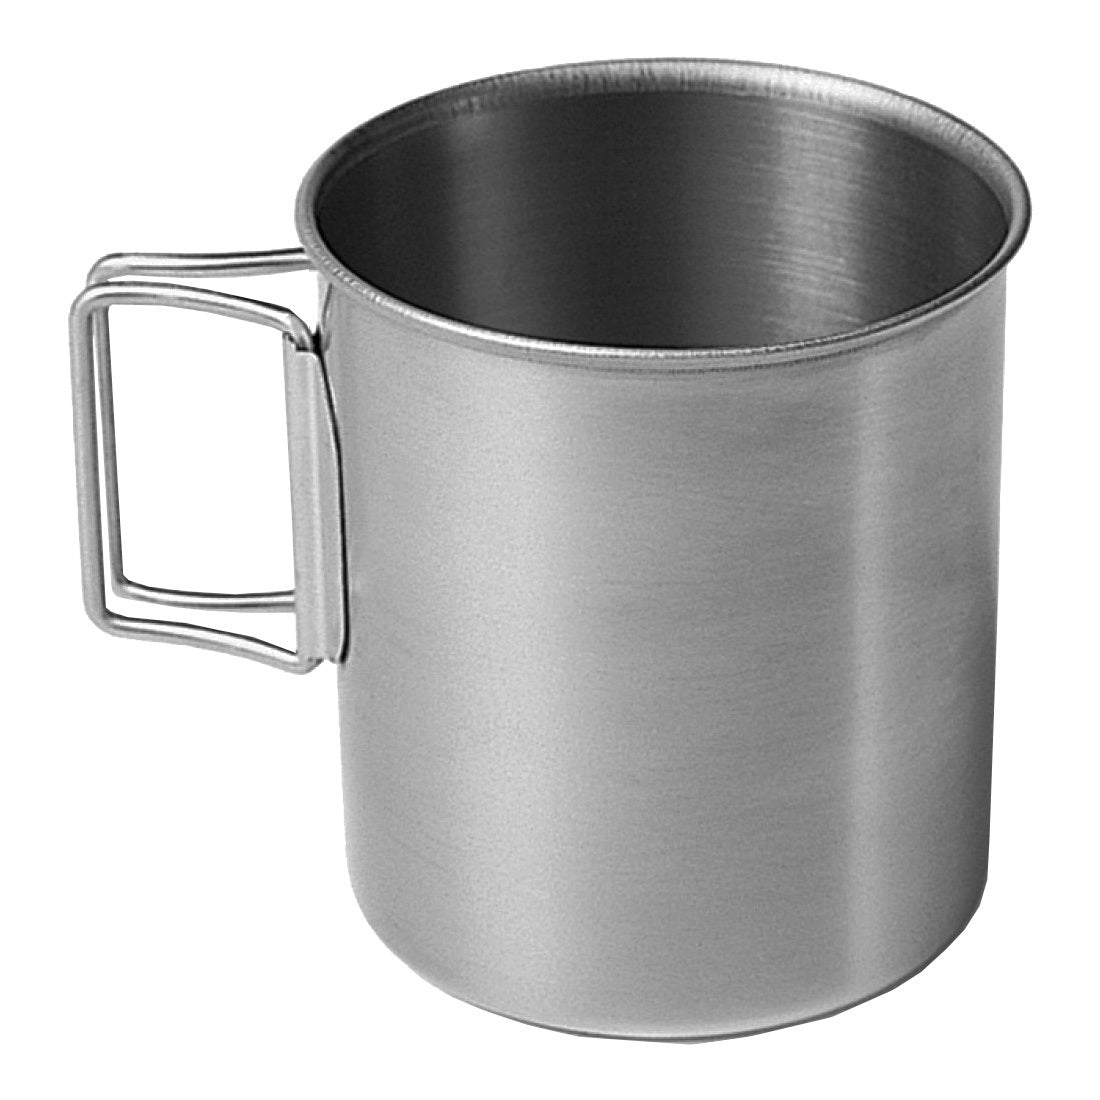 Alpine Outfitters Travel Mug, Stainless Steel